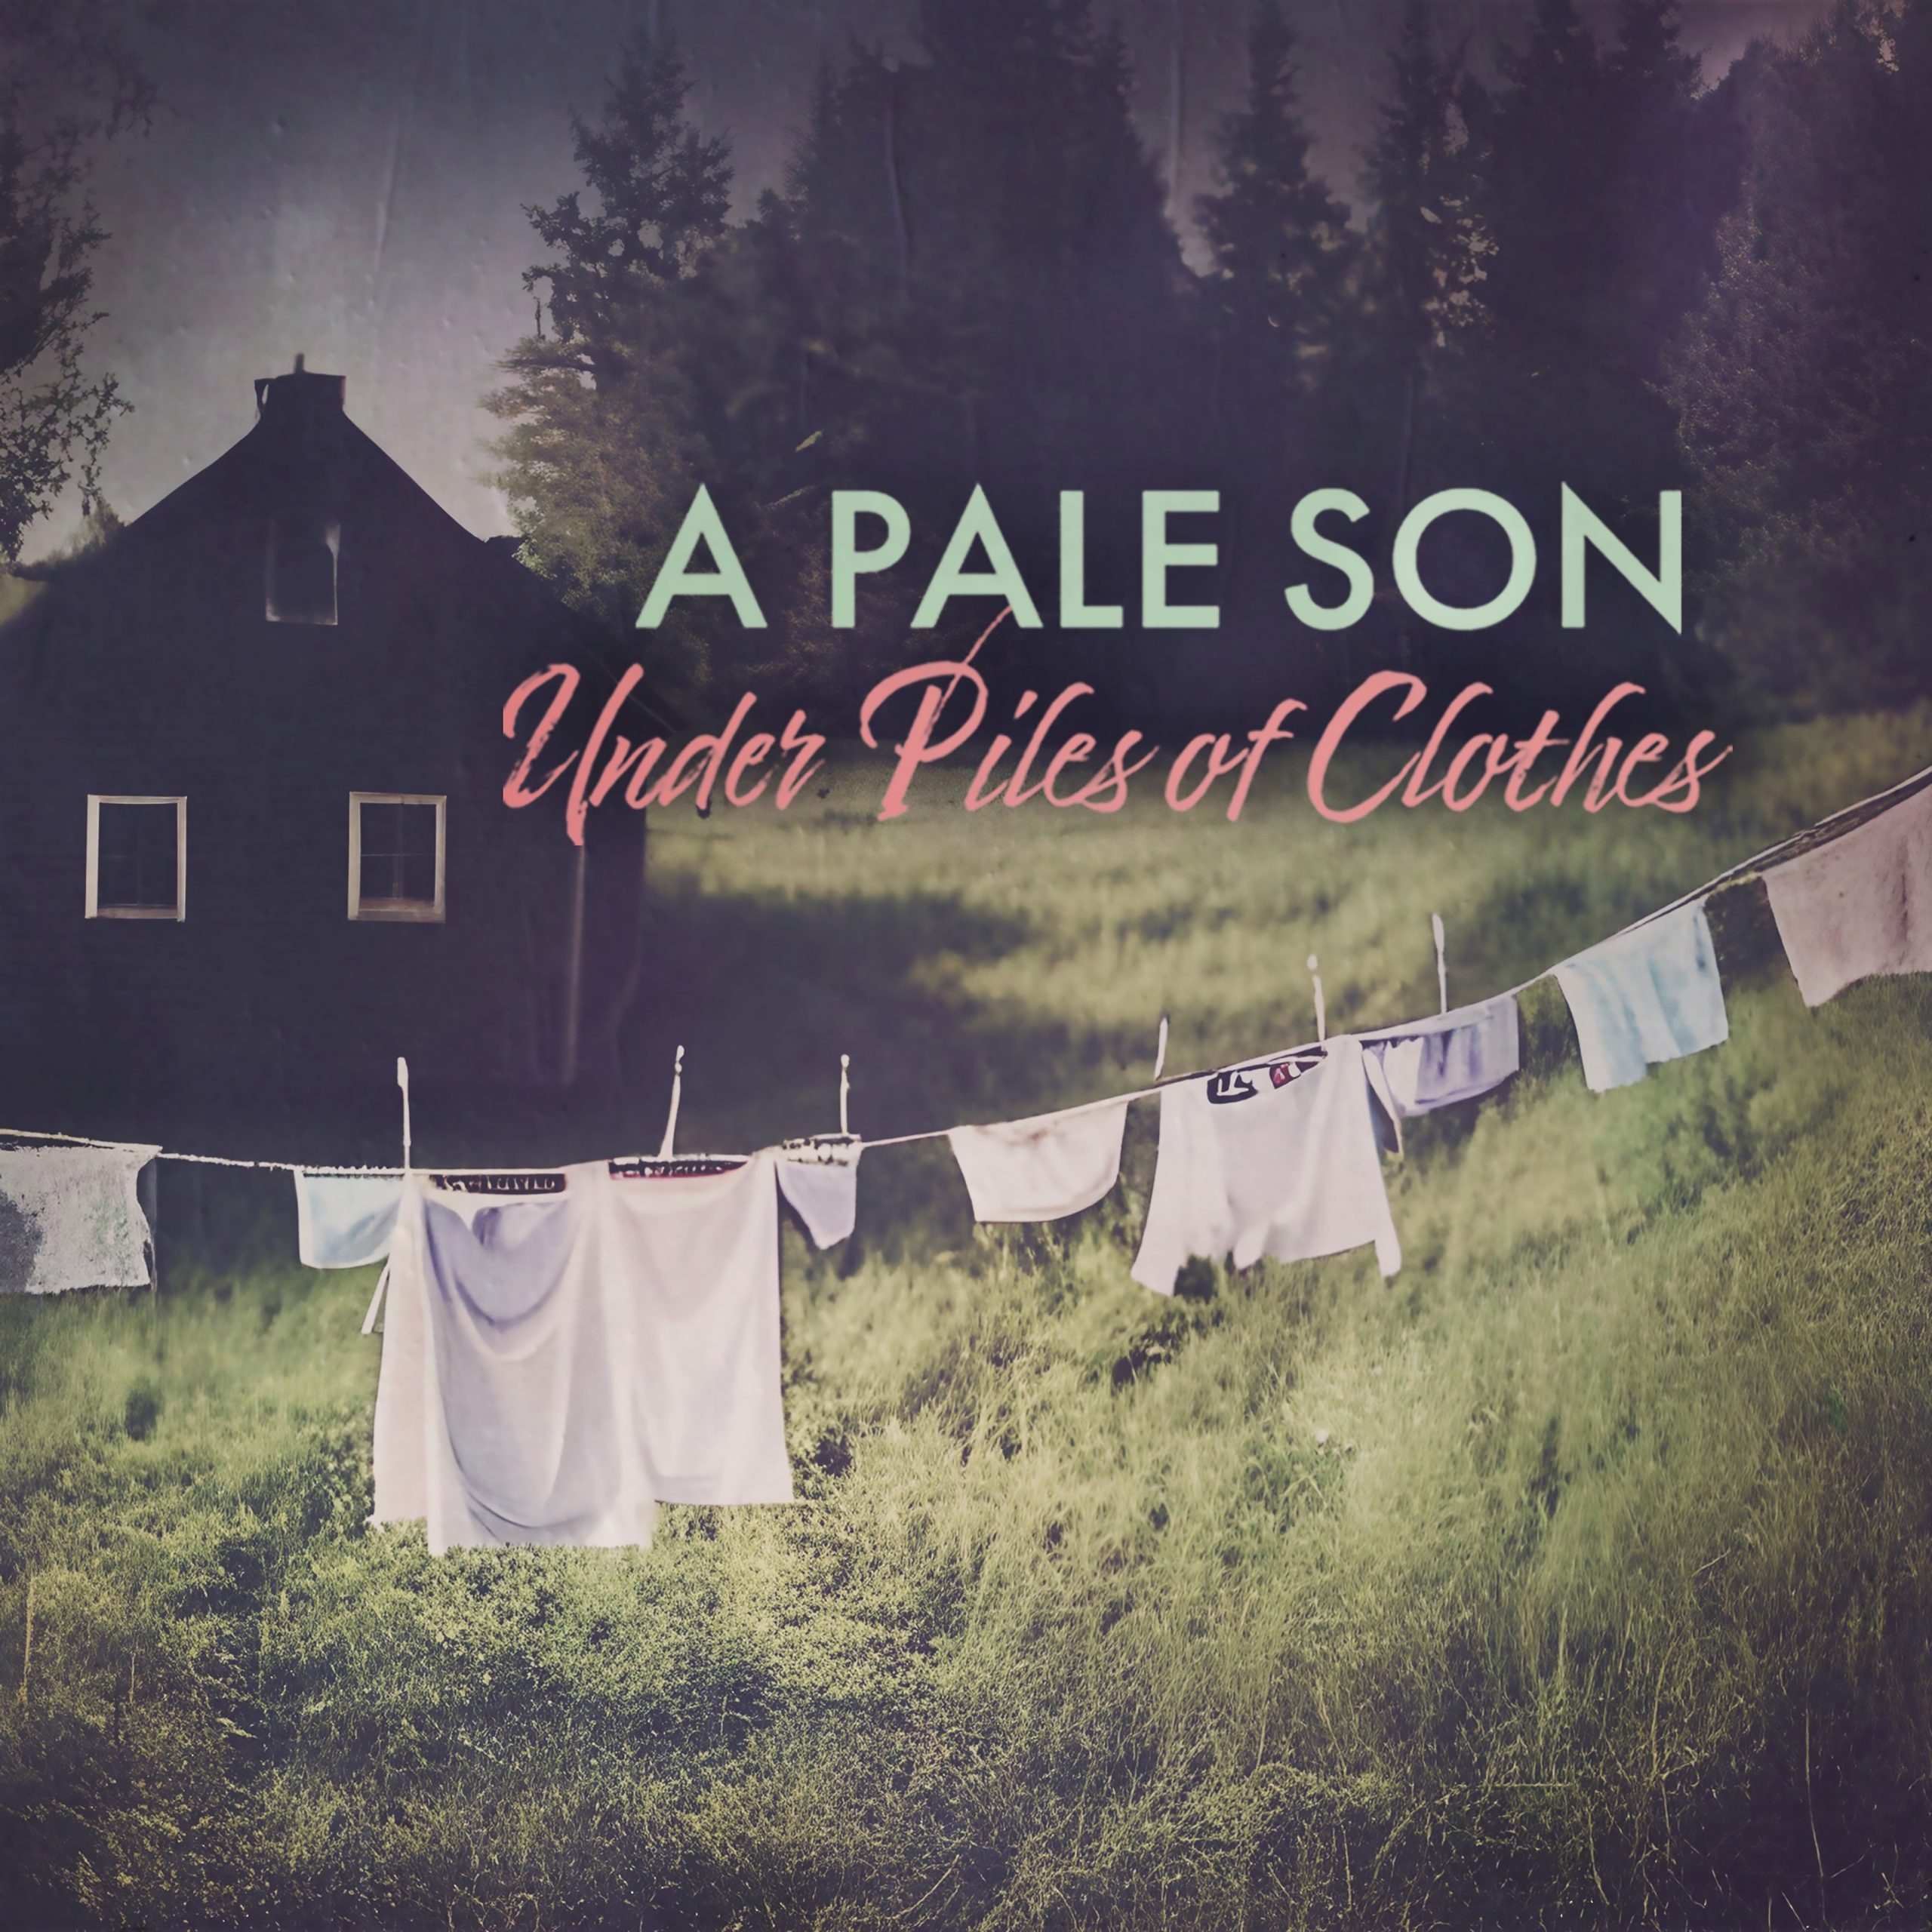 Frontr Cover for A Pale Son "Under Piles Of Clothes"